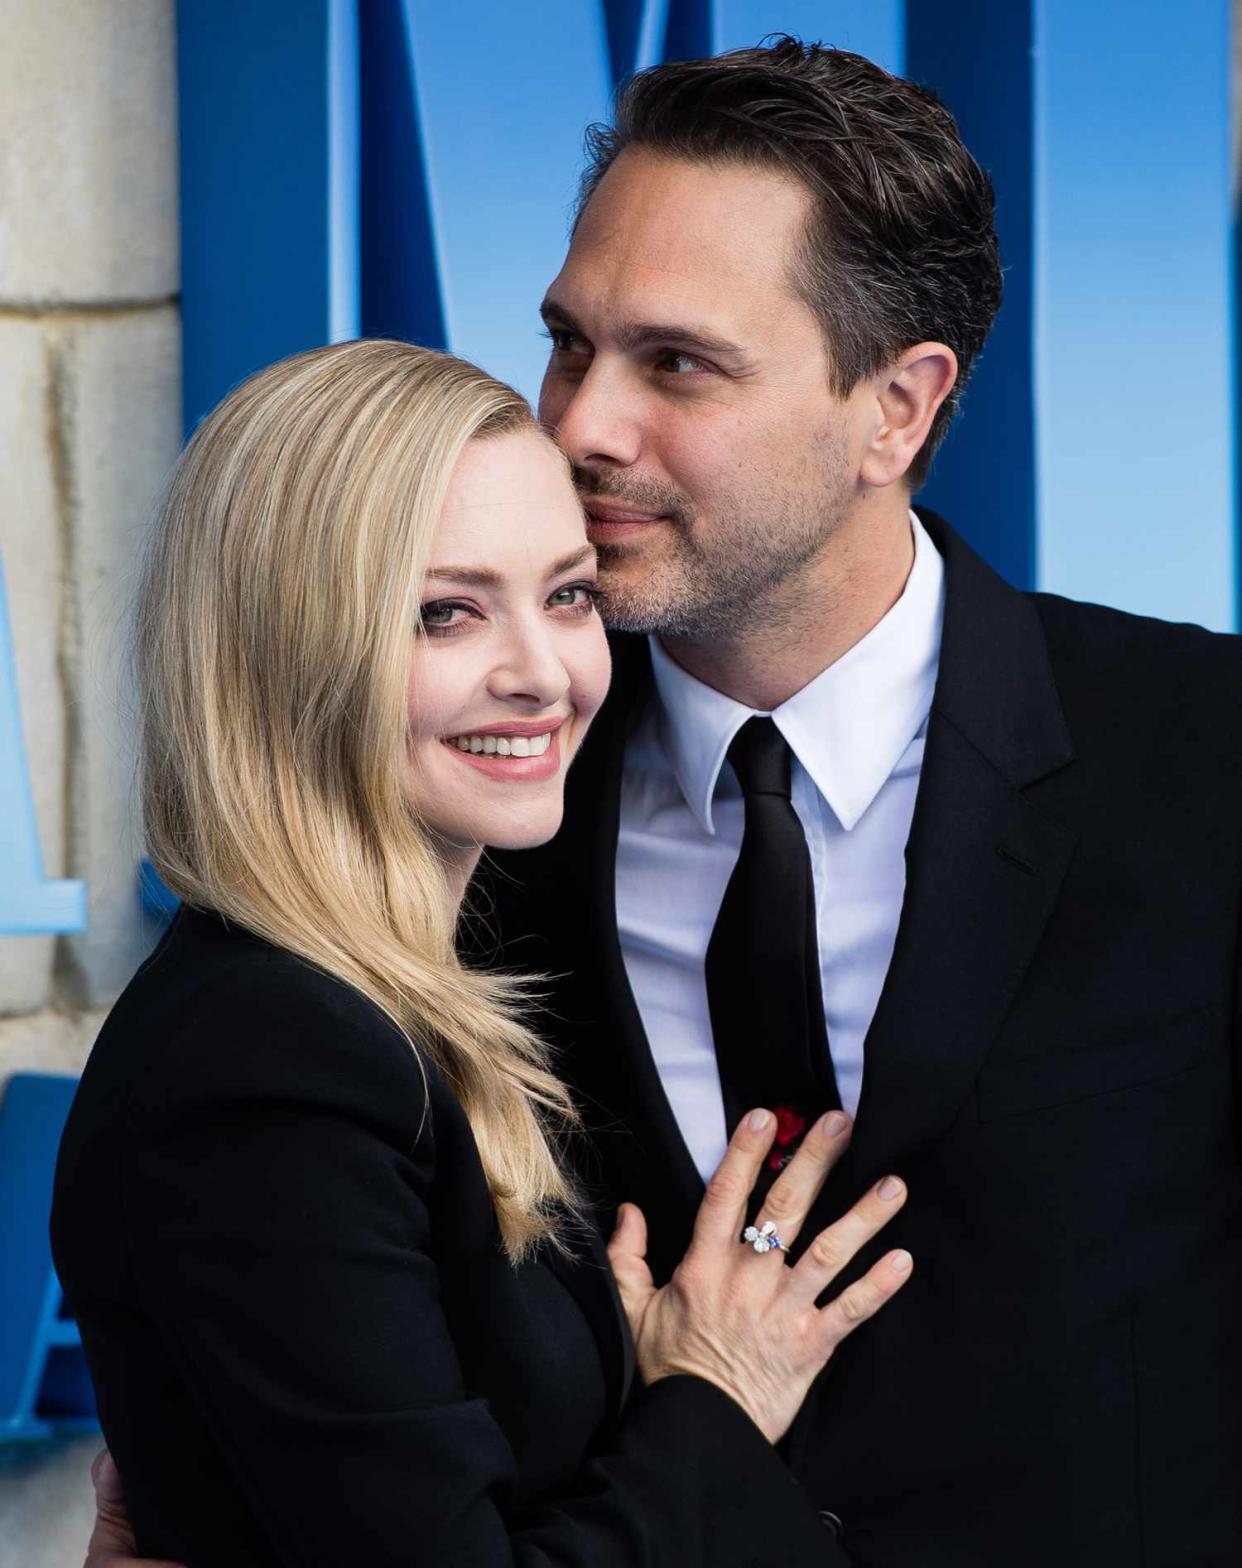 Thomas Sadoski and Amanda Seyfried attend the UK Premiere of "Mamma Mia! Here We Go Again" at Eventim Apollo on July 16, 2018 in London, England